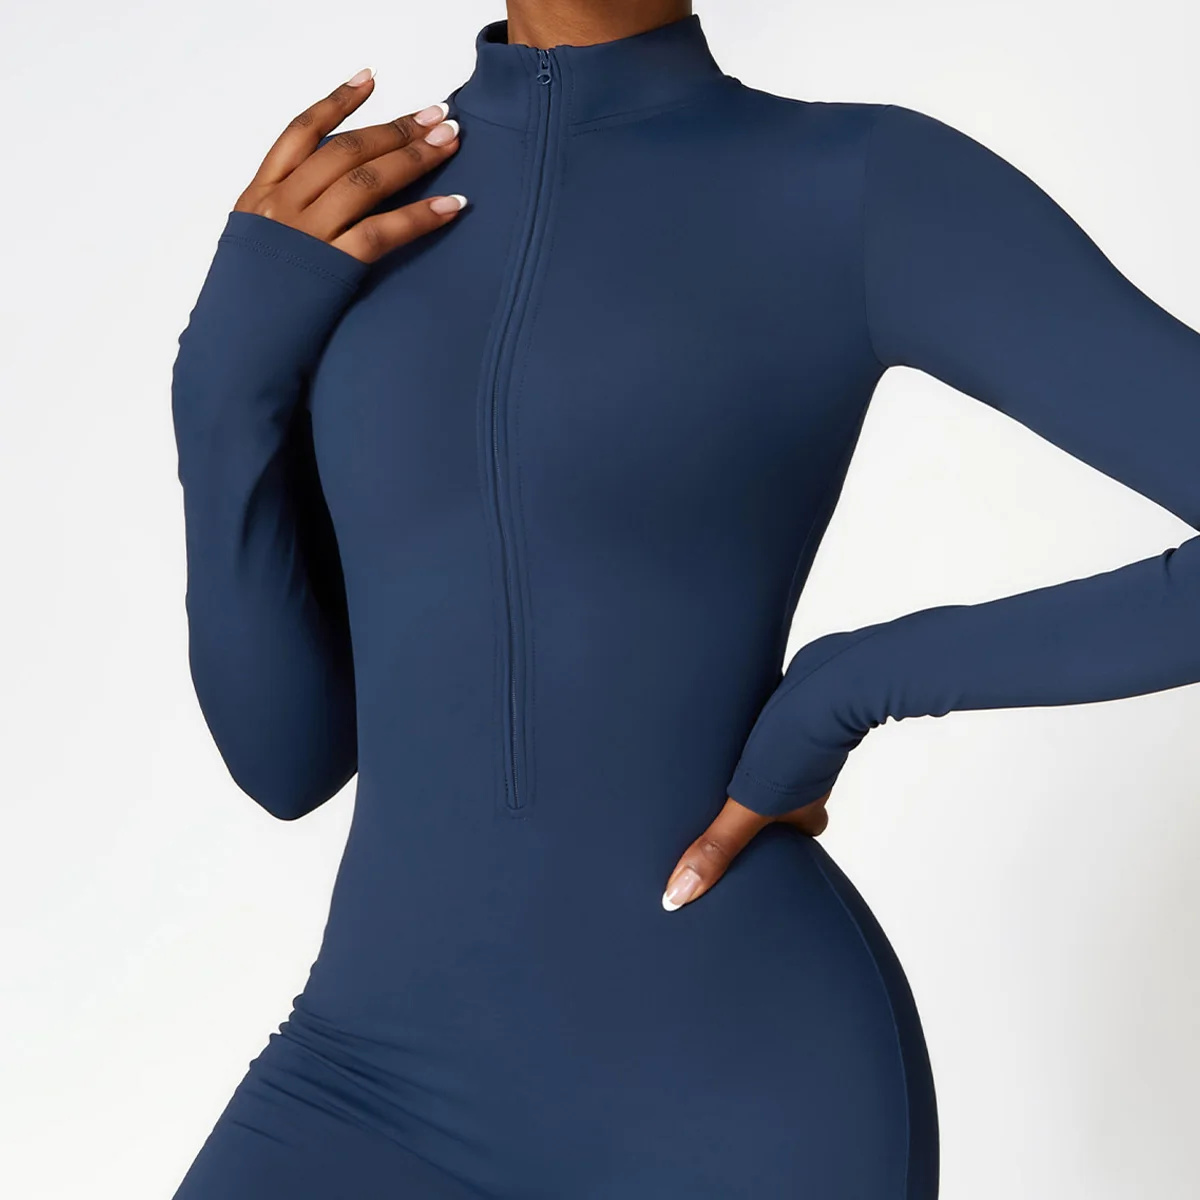 New Yoga Fitness Outfit Female Jumpsuits Sporty Workout Zipper Jumpsuit Women Rompers Long Sleeve Skinny Activity Wear Overalls